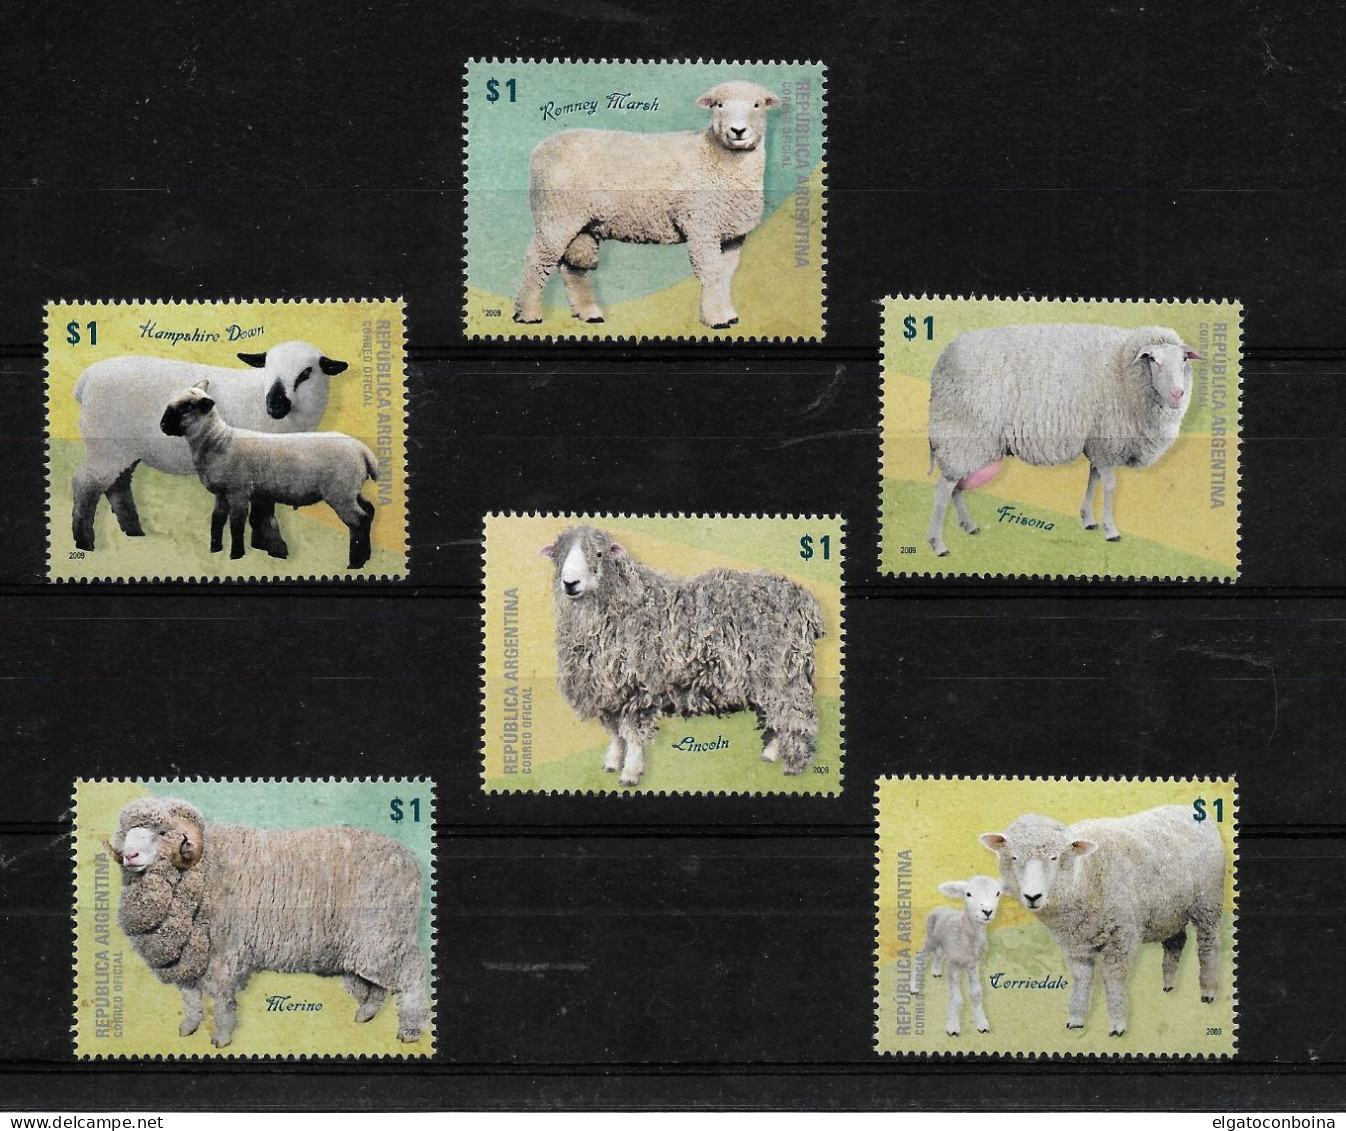 ARGENTINA 2009 SHEEP BREEDS SHEEPS FAUNA MINIATURE SHEET SET MINT NEVER HINGED - Used Stamps